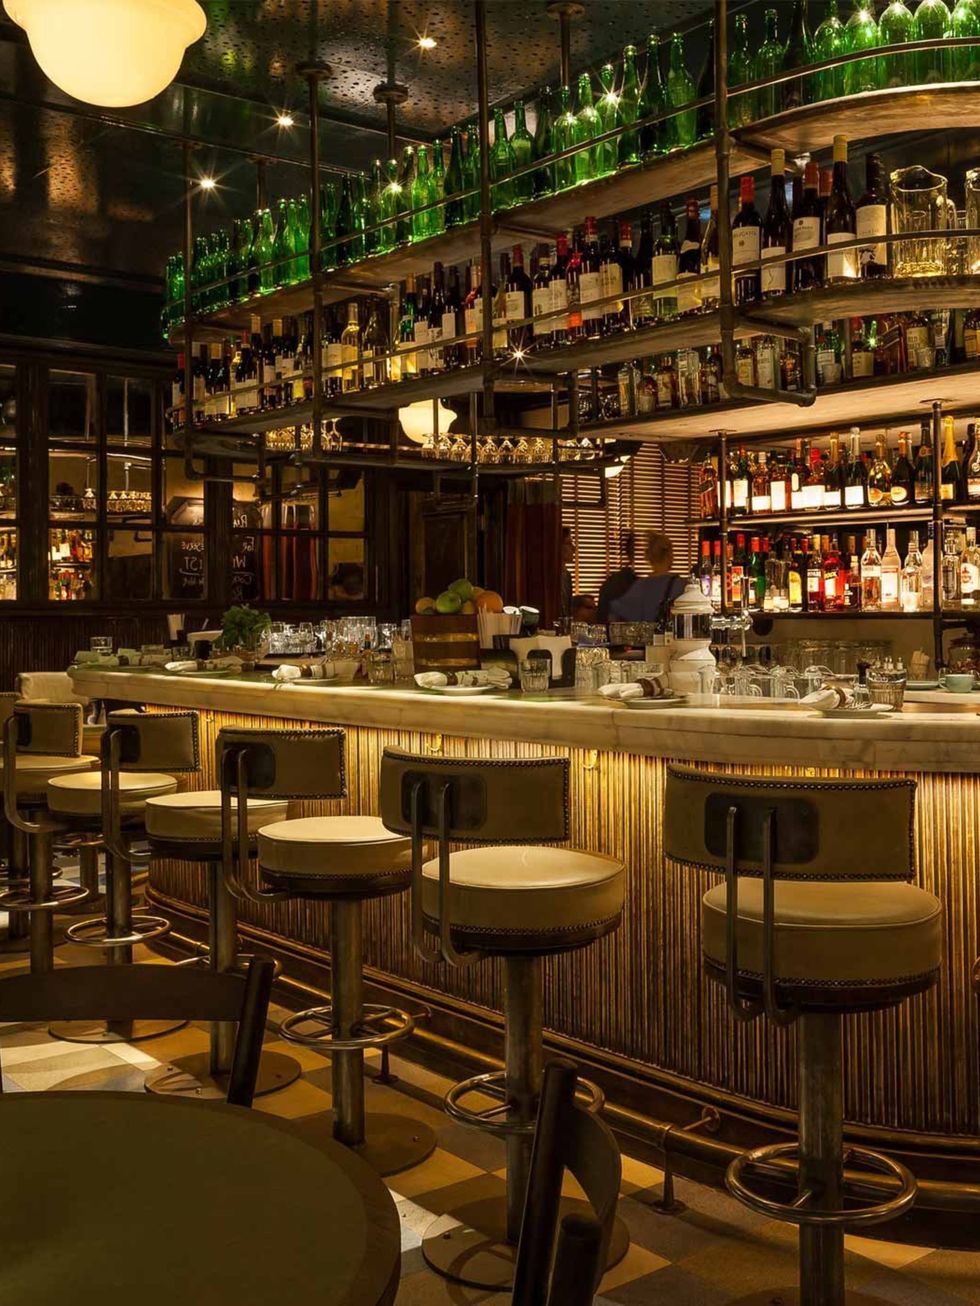 &lt;p&gt;&lt;strong&gt;Jackson + Rye &lt;/strong&gt;&lt;/p&gt;&lt;p&gt;Jackson + Rye is an upscale American brasserie in the heart of Soho, offering an informal menu from breakfast to late of dishes inspired by the Southern States. Think buttermilk pancak